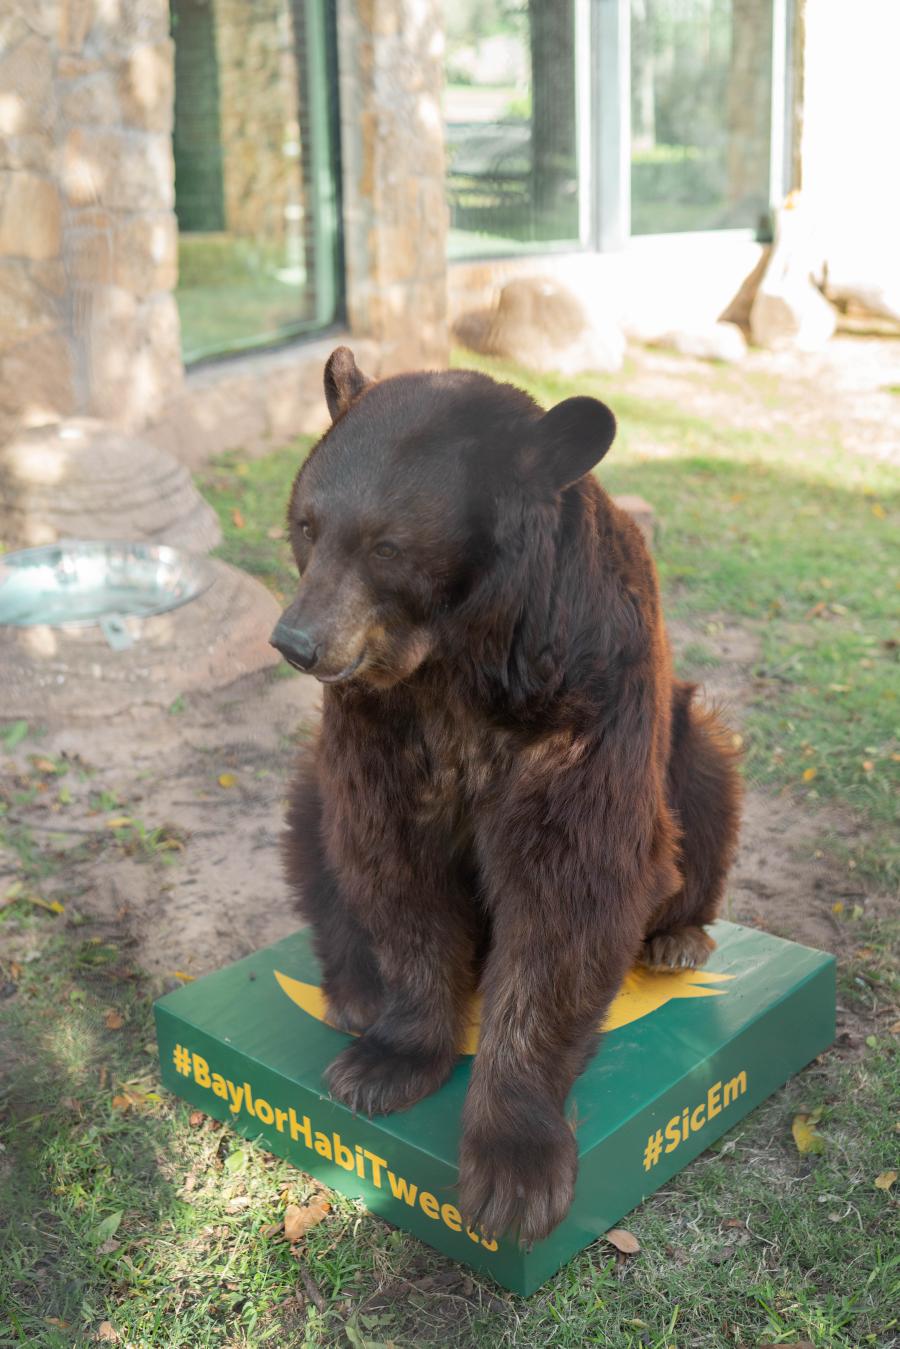 American black bear sitting on a green box with gold markings